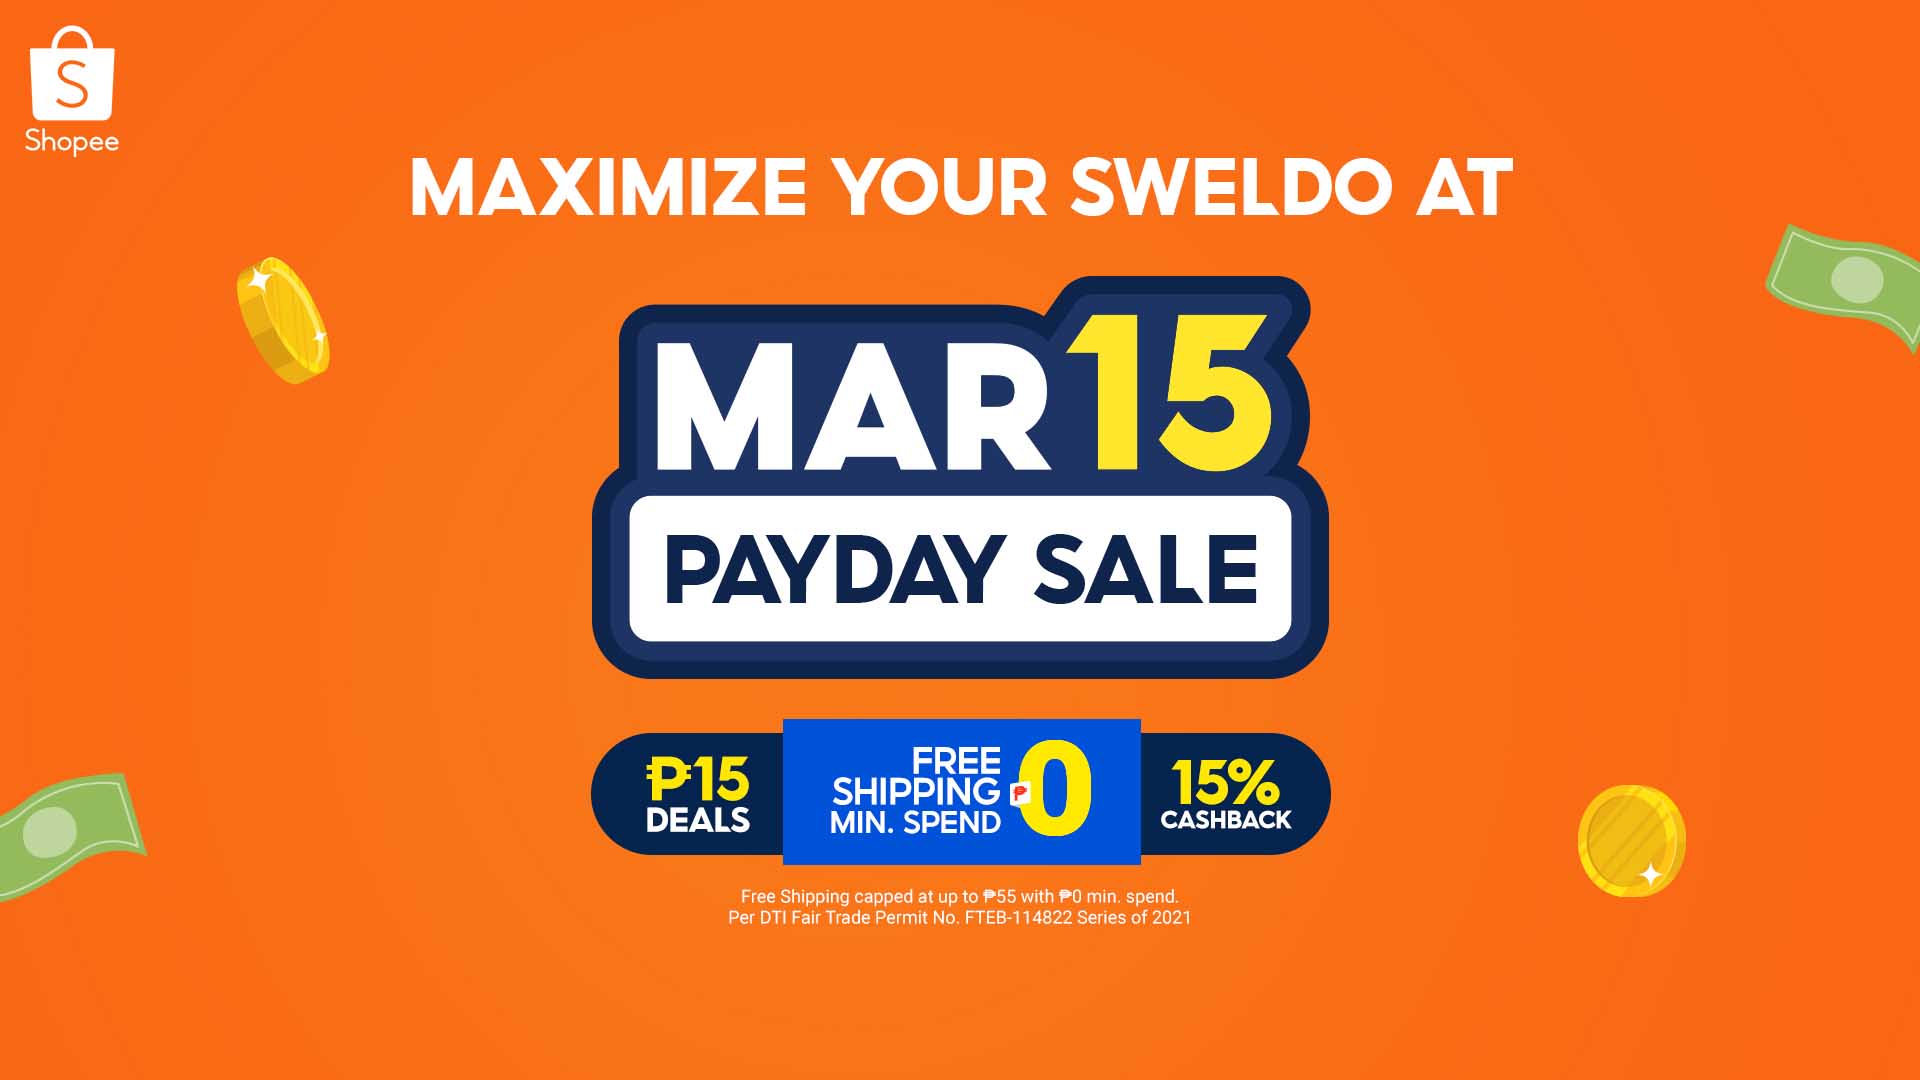 5 ways to maximize your sweldo at the Shopee 3.15 Payday Sale